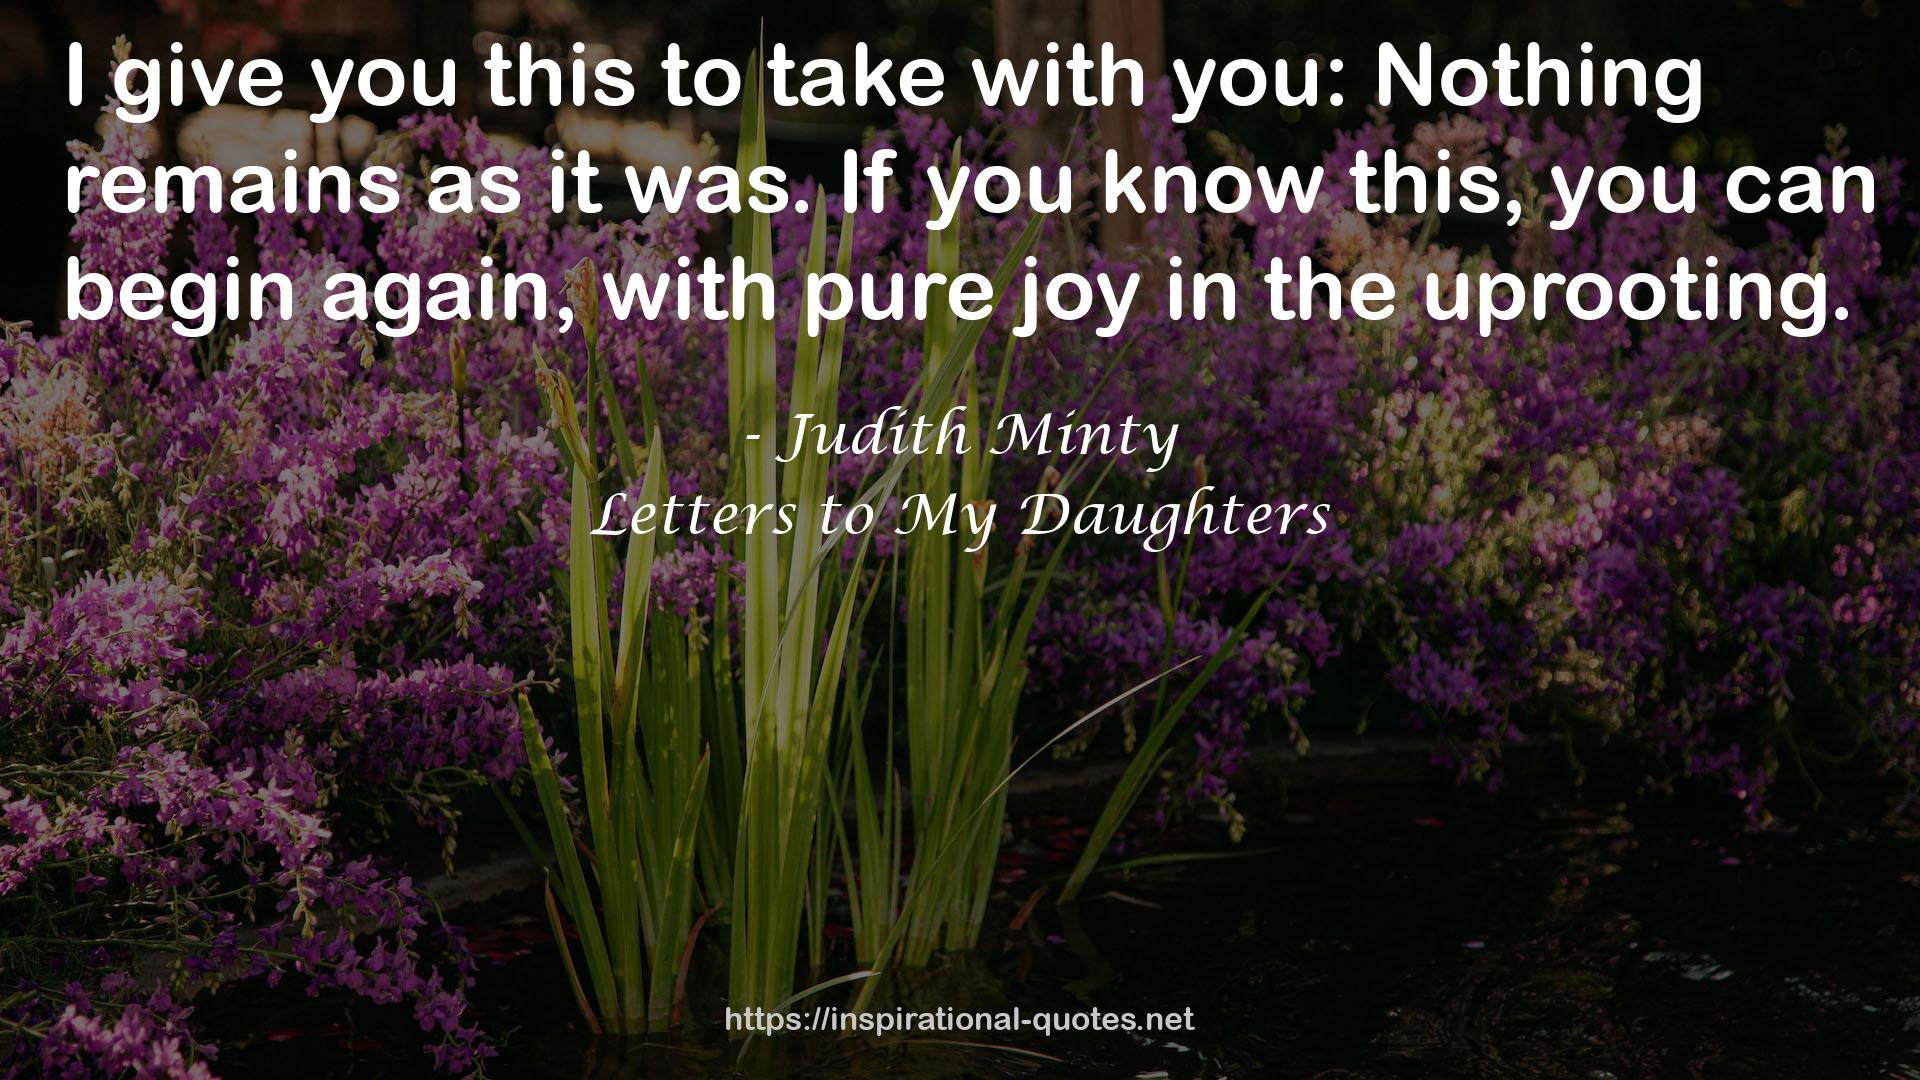 Judith Minty QUOTES